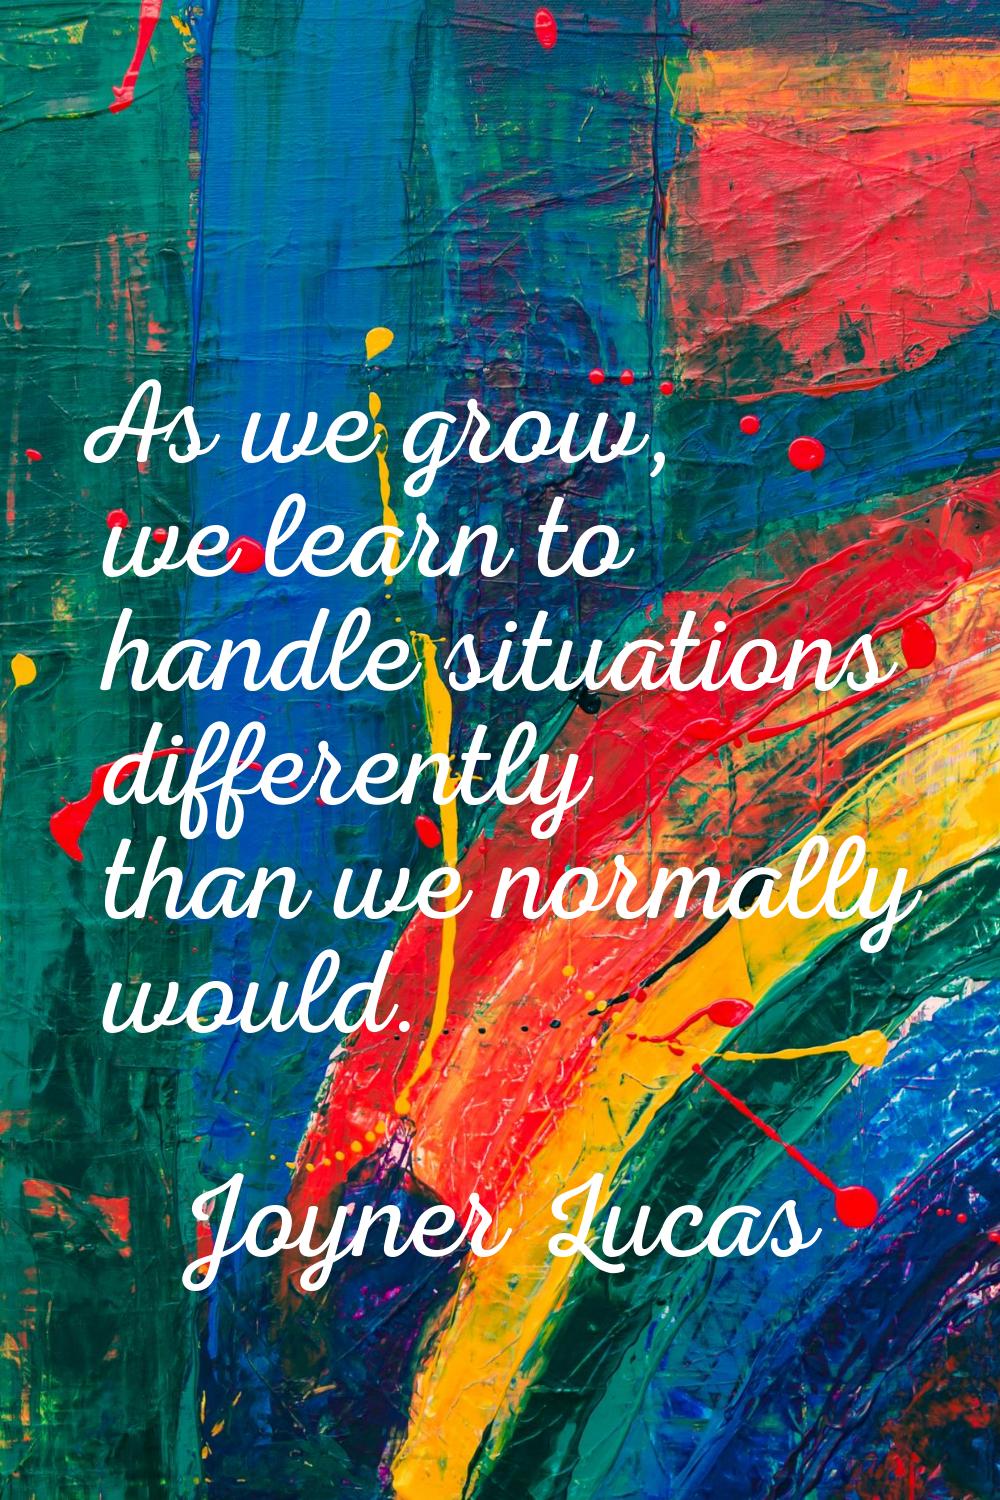 As we grow, we learn to handle situations differently than we normally would.